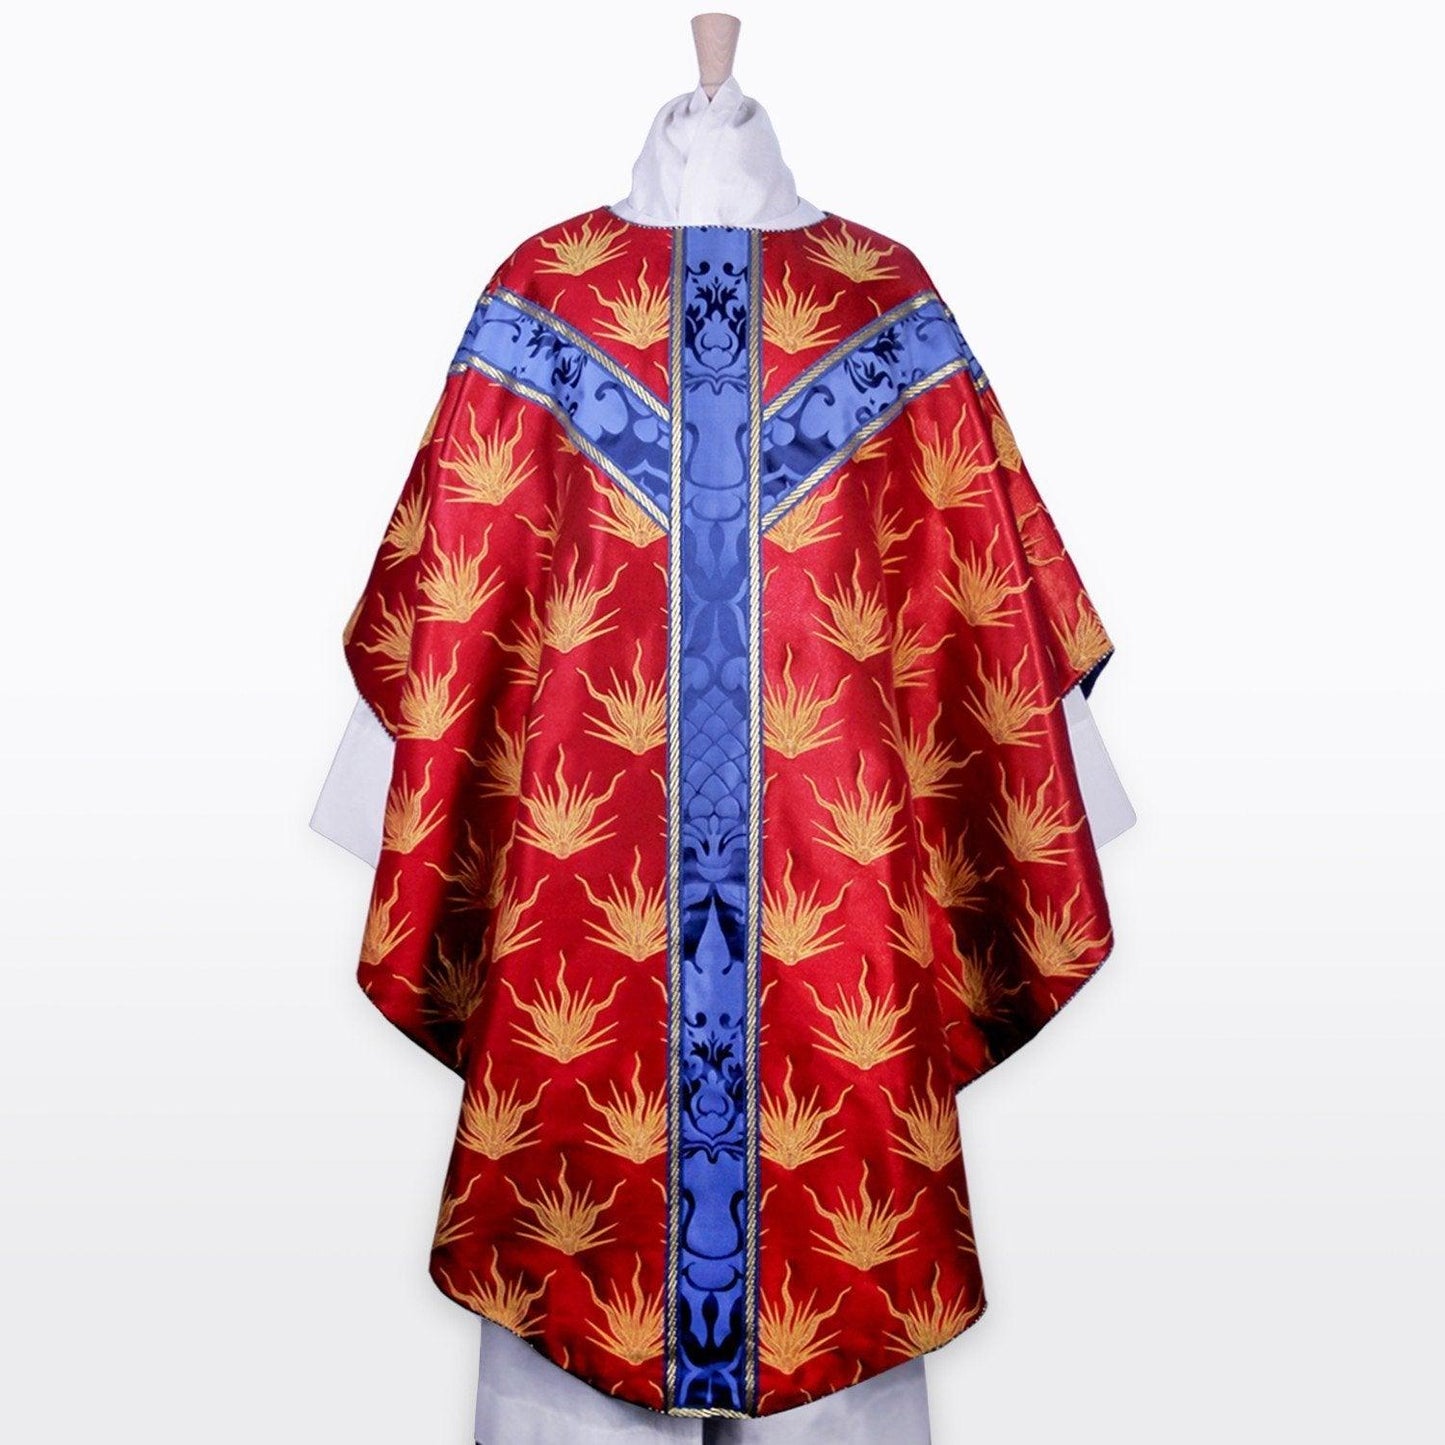 Full Gothic Chasuble in Red Pentecost Brocade with Blue Orphrey - Watts & Co. (international)